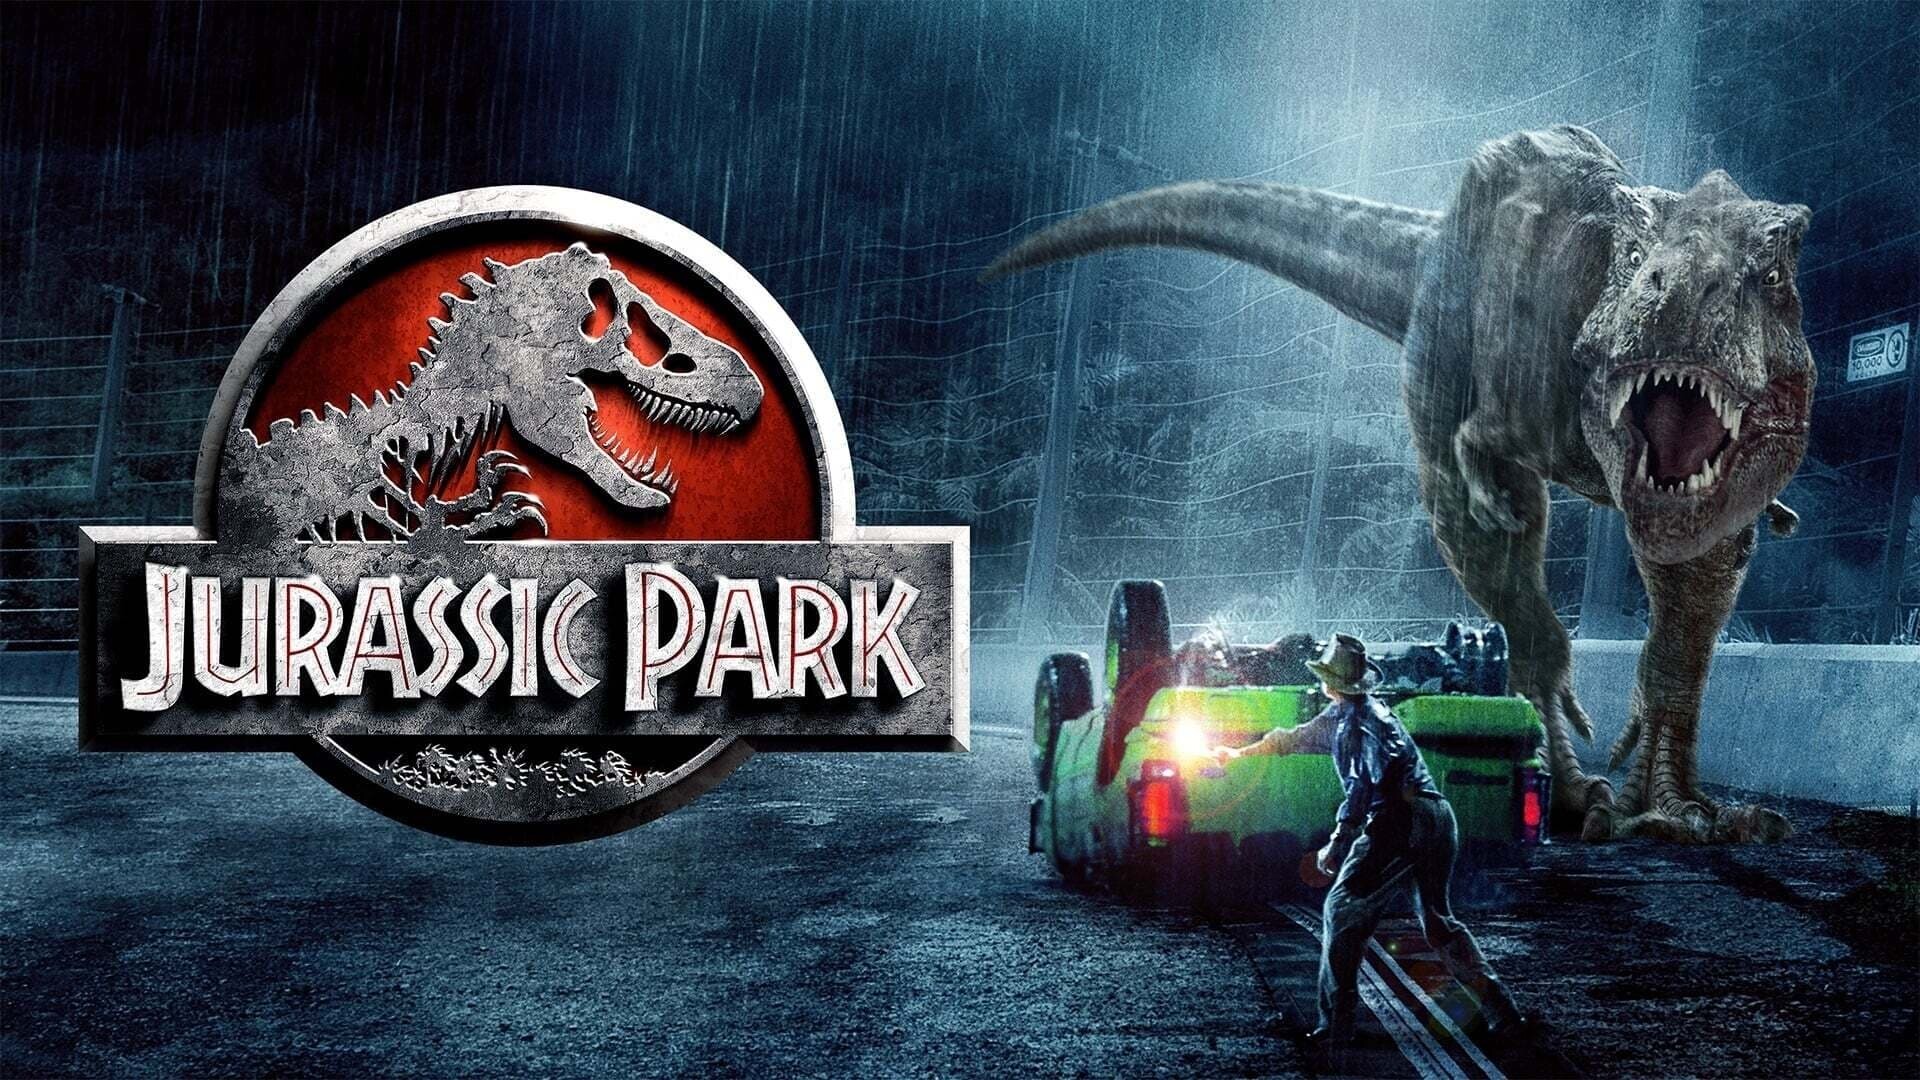 Jurassic Park: The film went on to gross over $914 million worldwide in its original theatrical run. 1920x1080 Full HD Background.